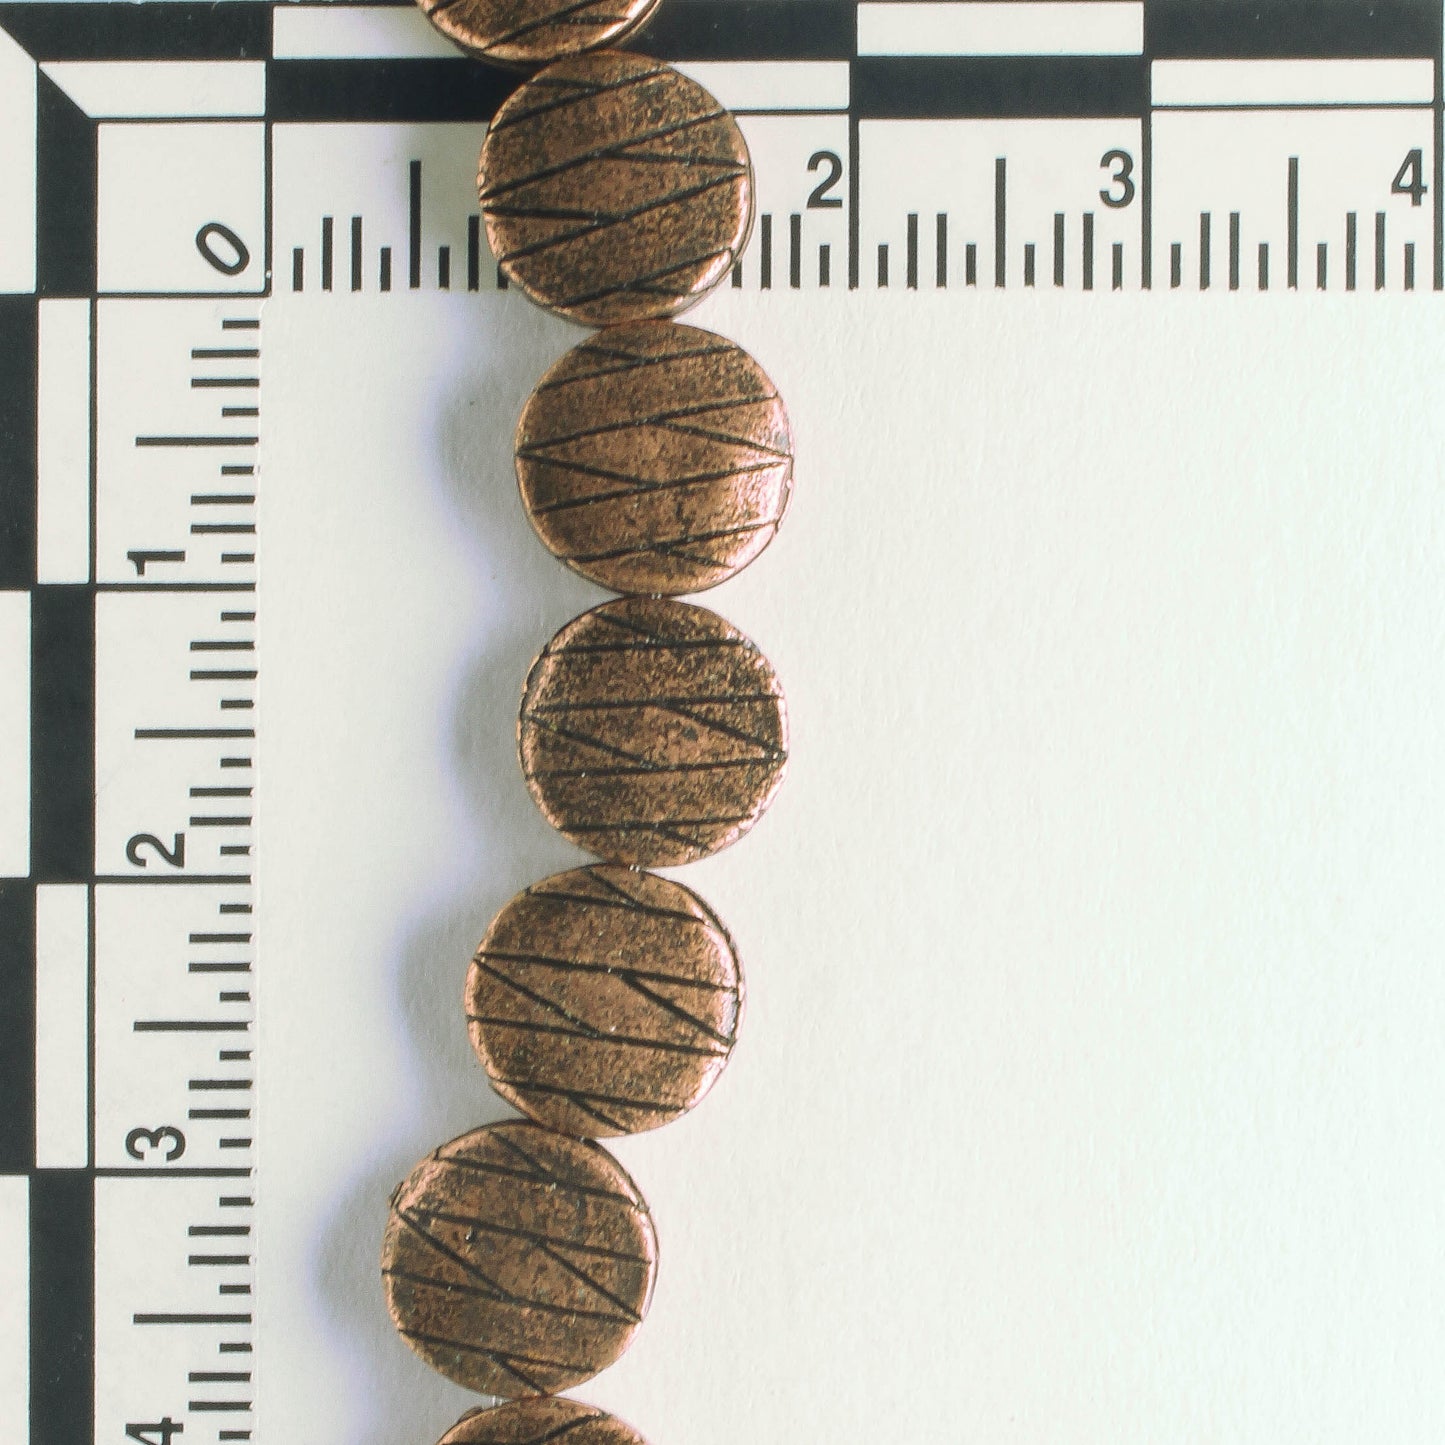 Pewter Beads, Copper Plated - 8" Strand